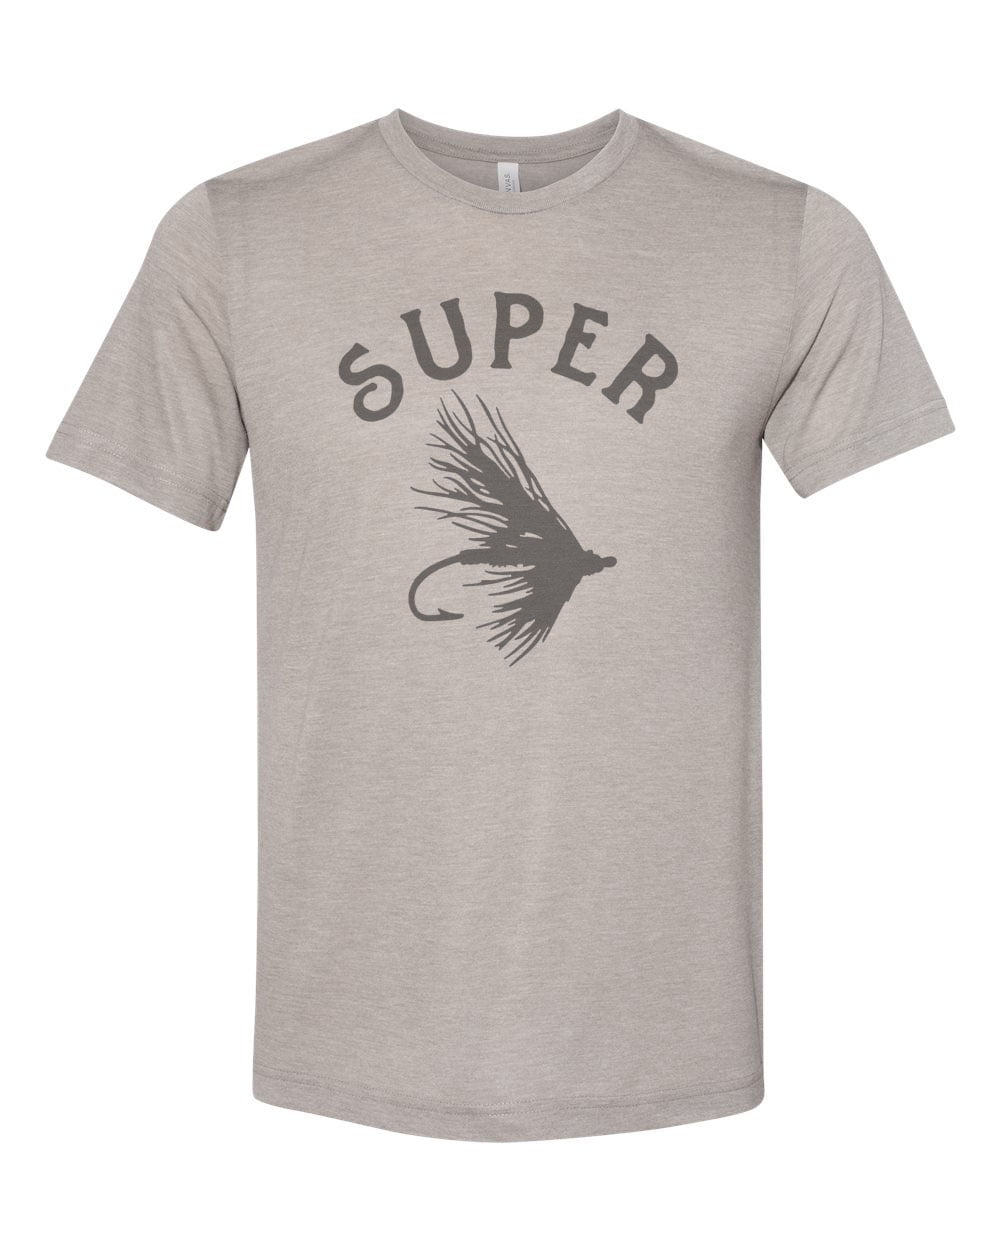 Fly Fishing Shirt, Super Fly, Fly Fishing Apparel, Sublimation T, Unisex Tee,  Fishing Tee, Fishing Shirt, Dad Gift, Trout Fishing Shirt, Heather Stone,  Large 